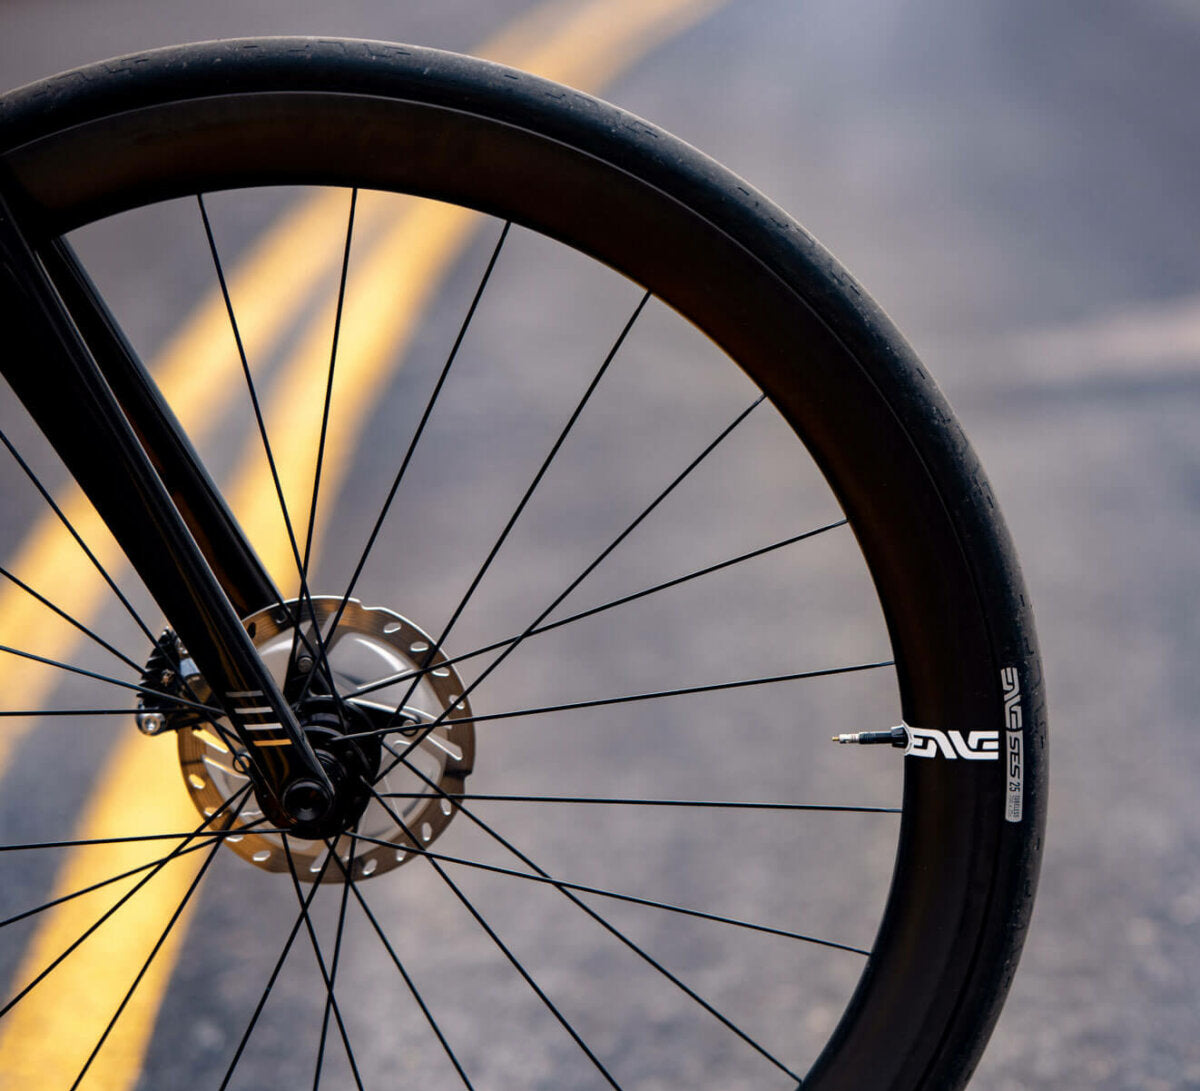 Gravel wheelsets and tires